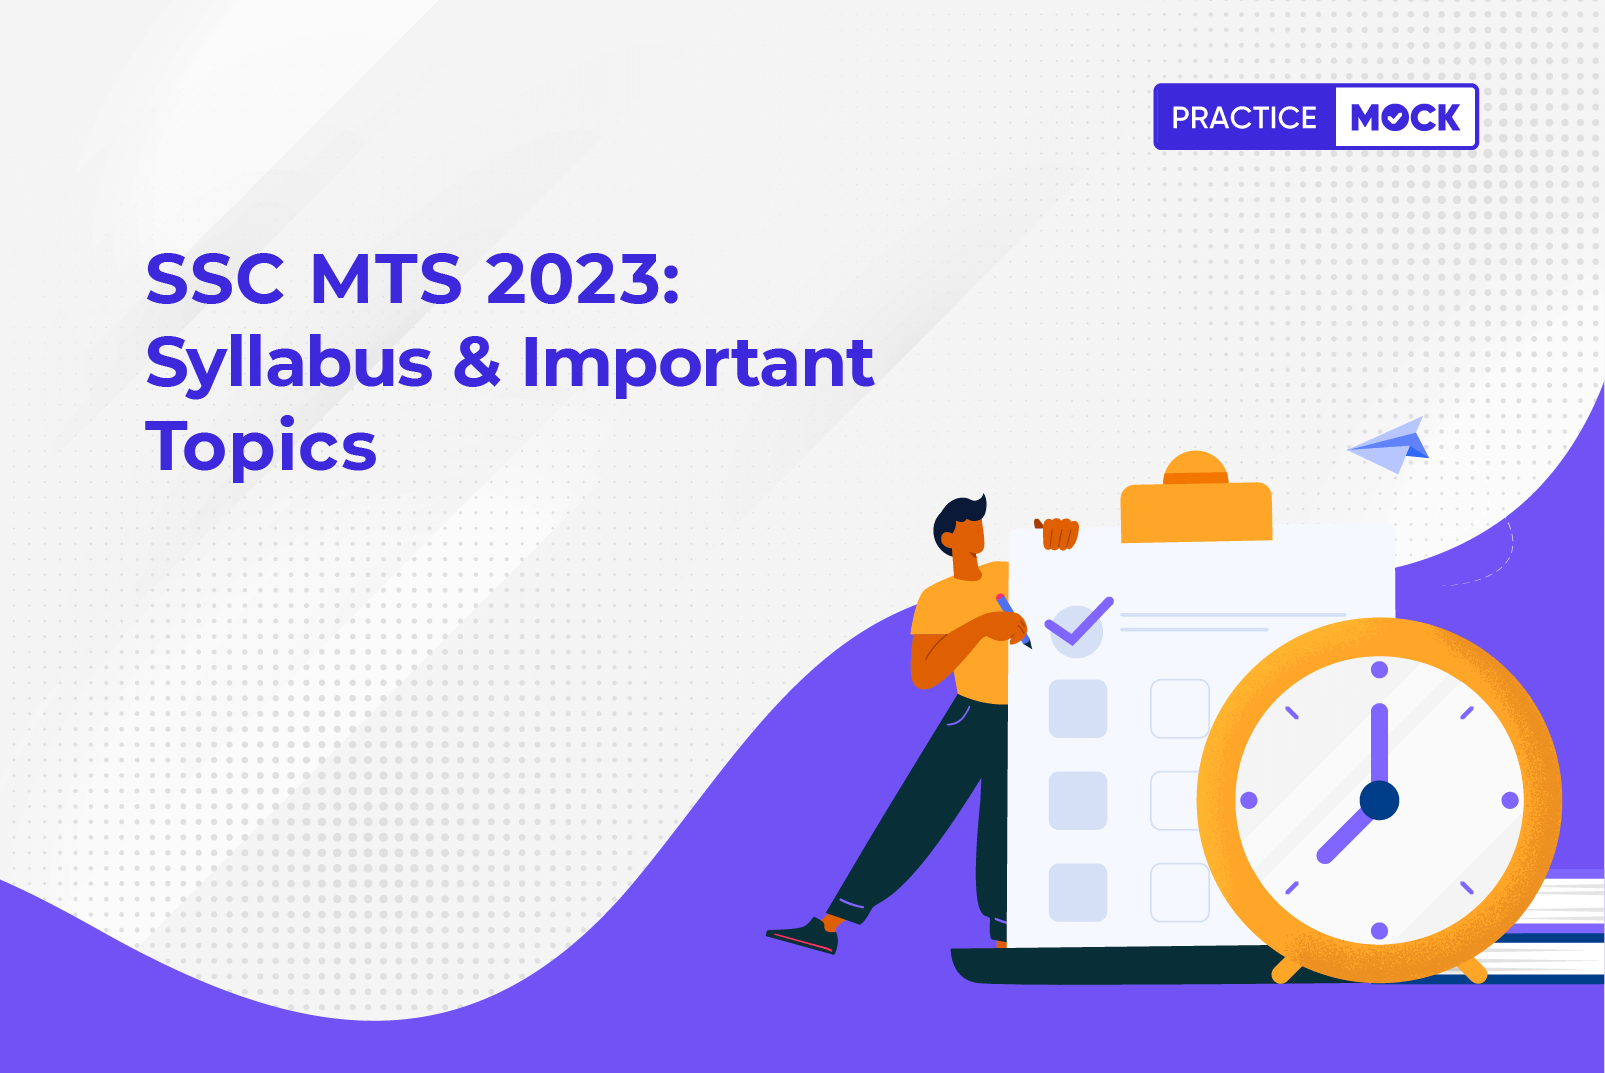 SSC MTS 2023 Syllabus and Important